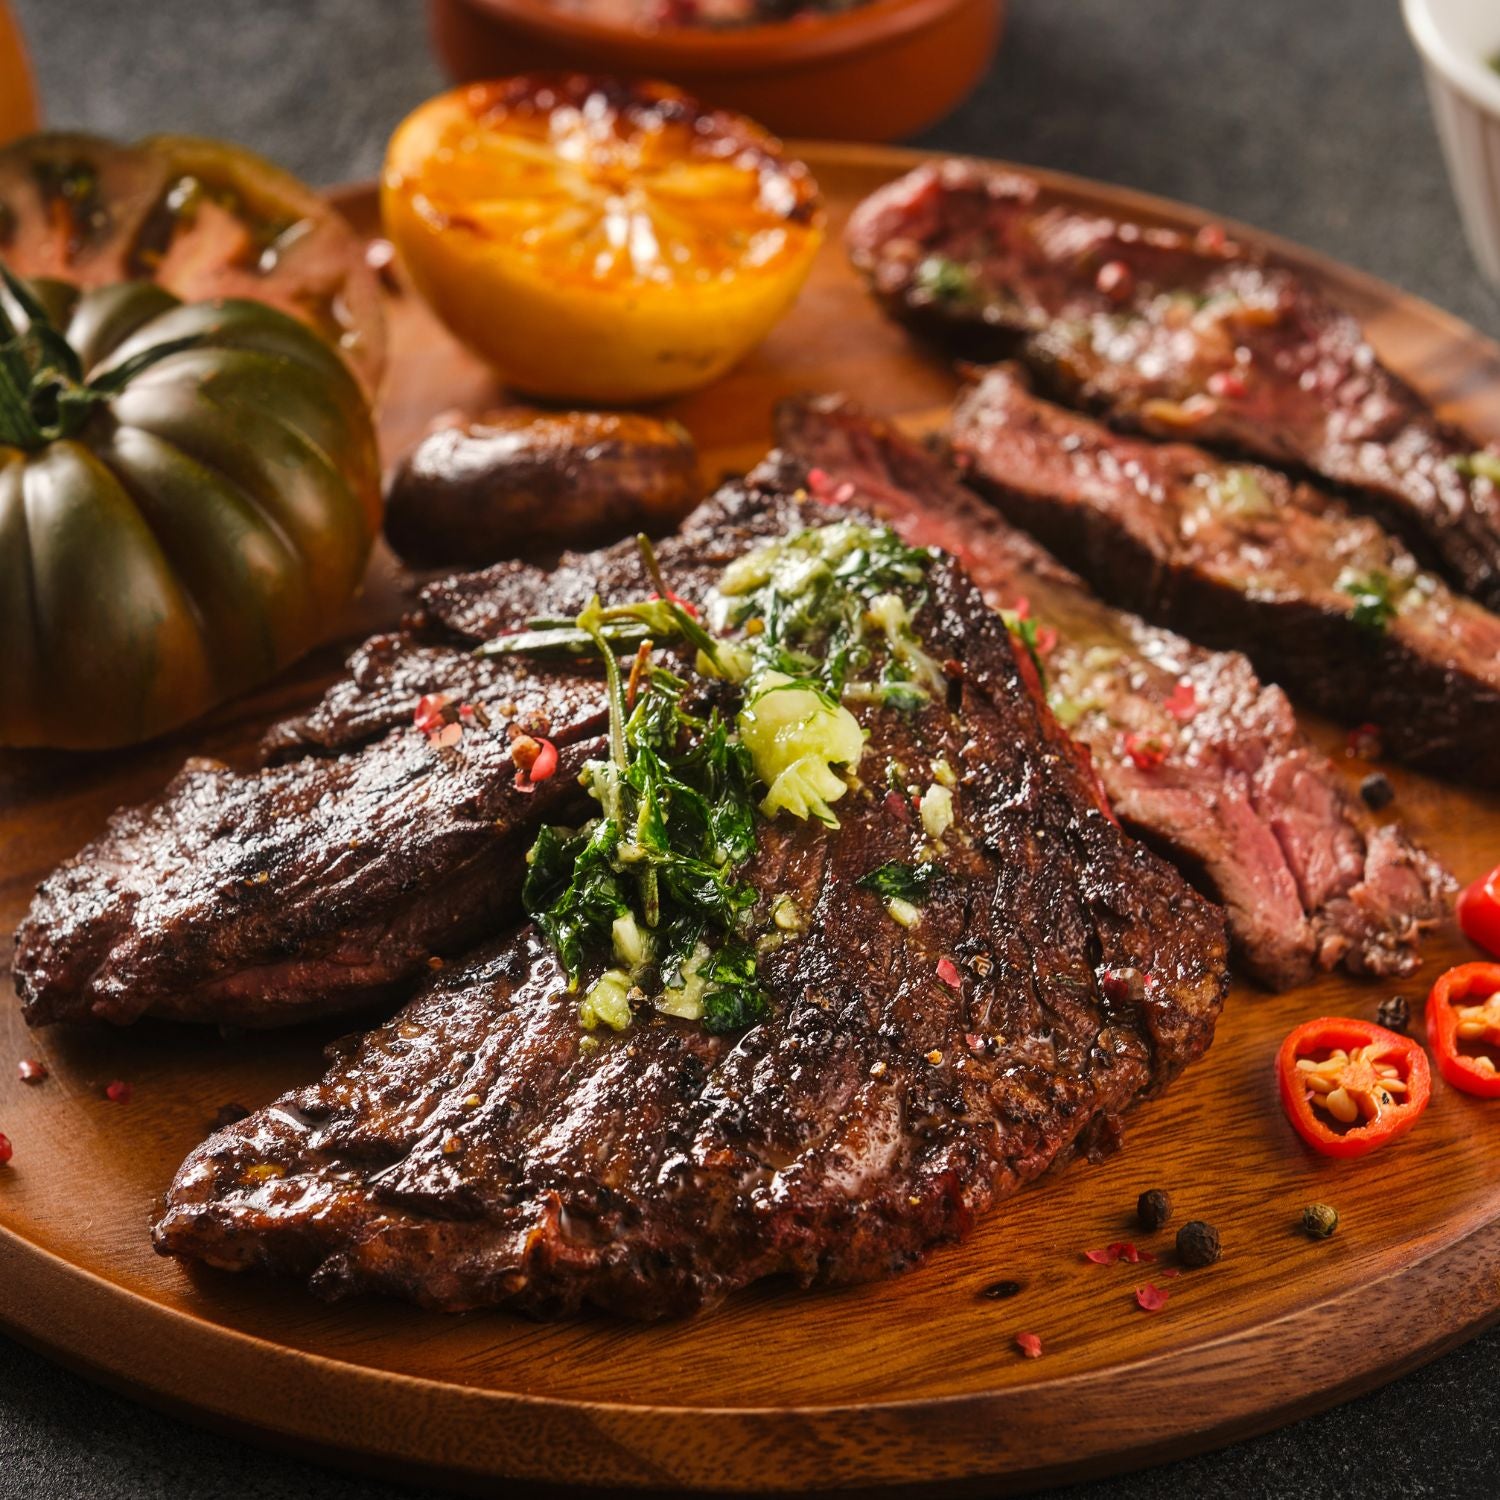 grilled hanger steak on a round wooden cutting board to show what is a hanger steak